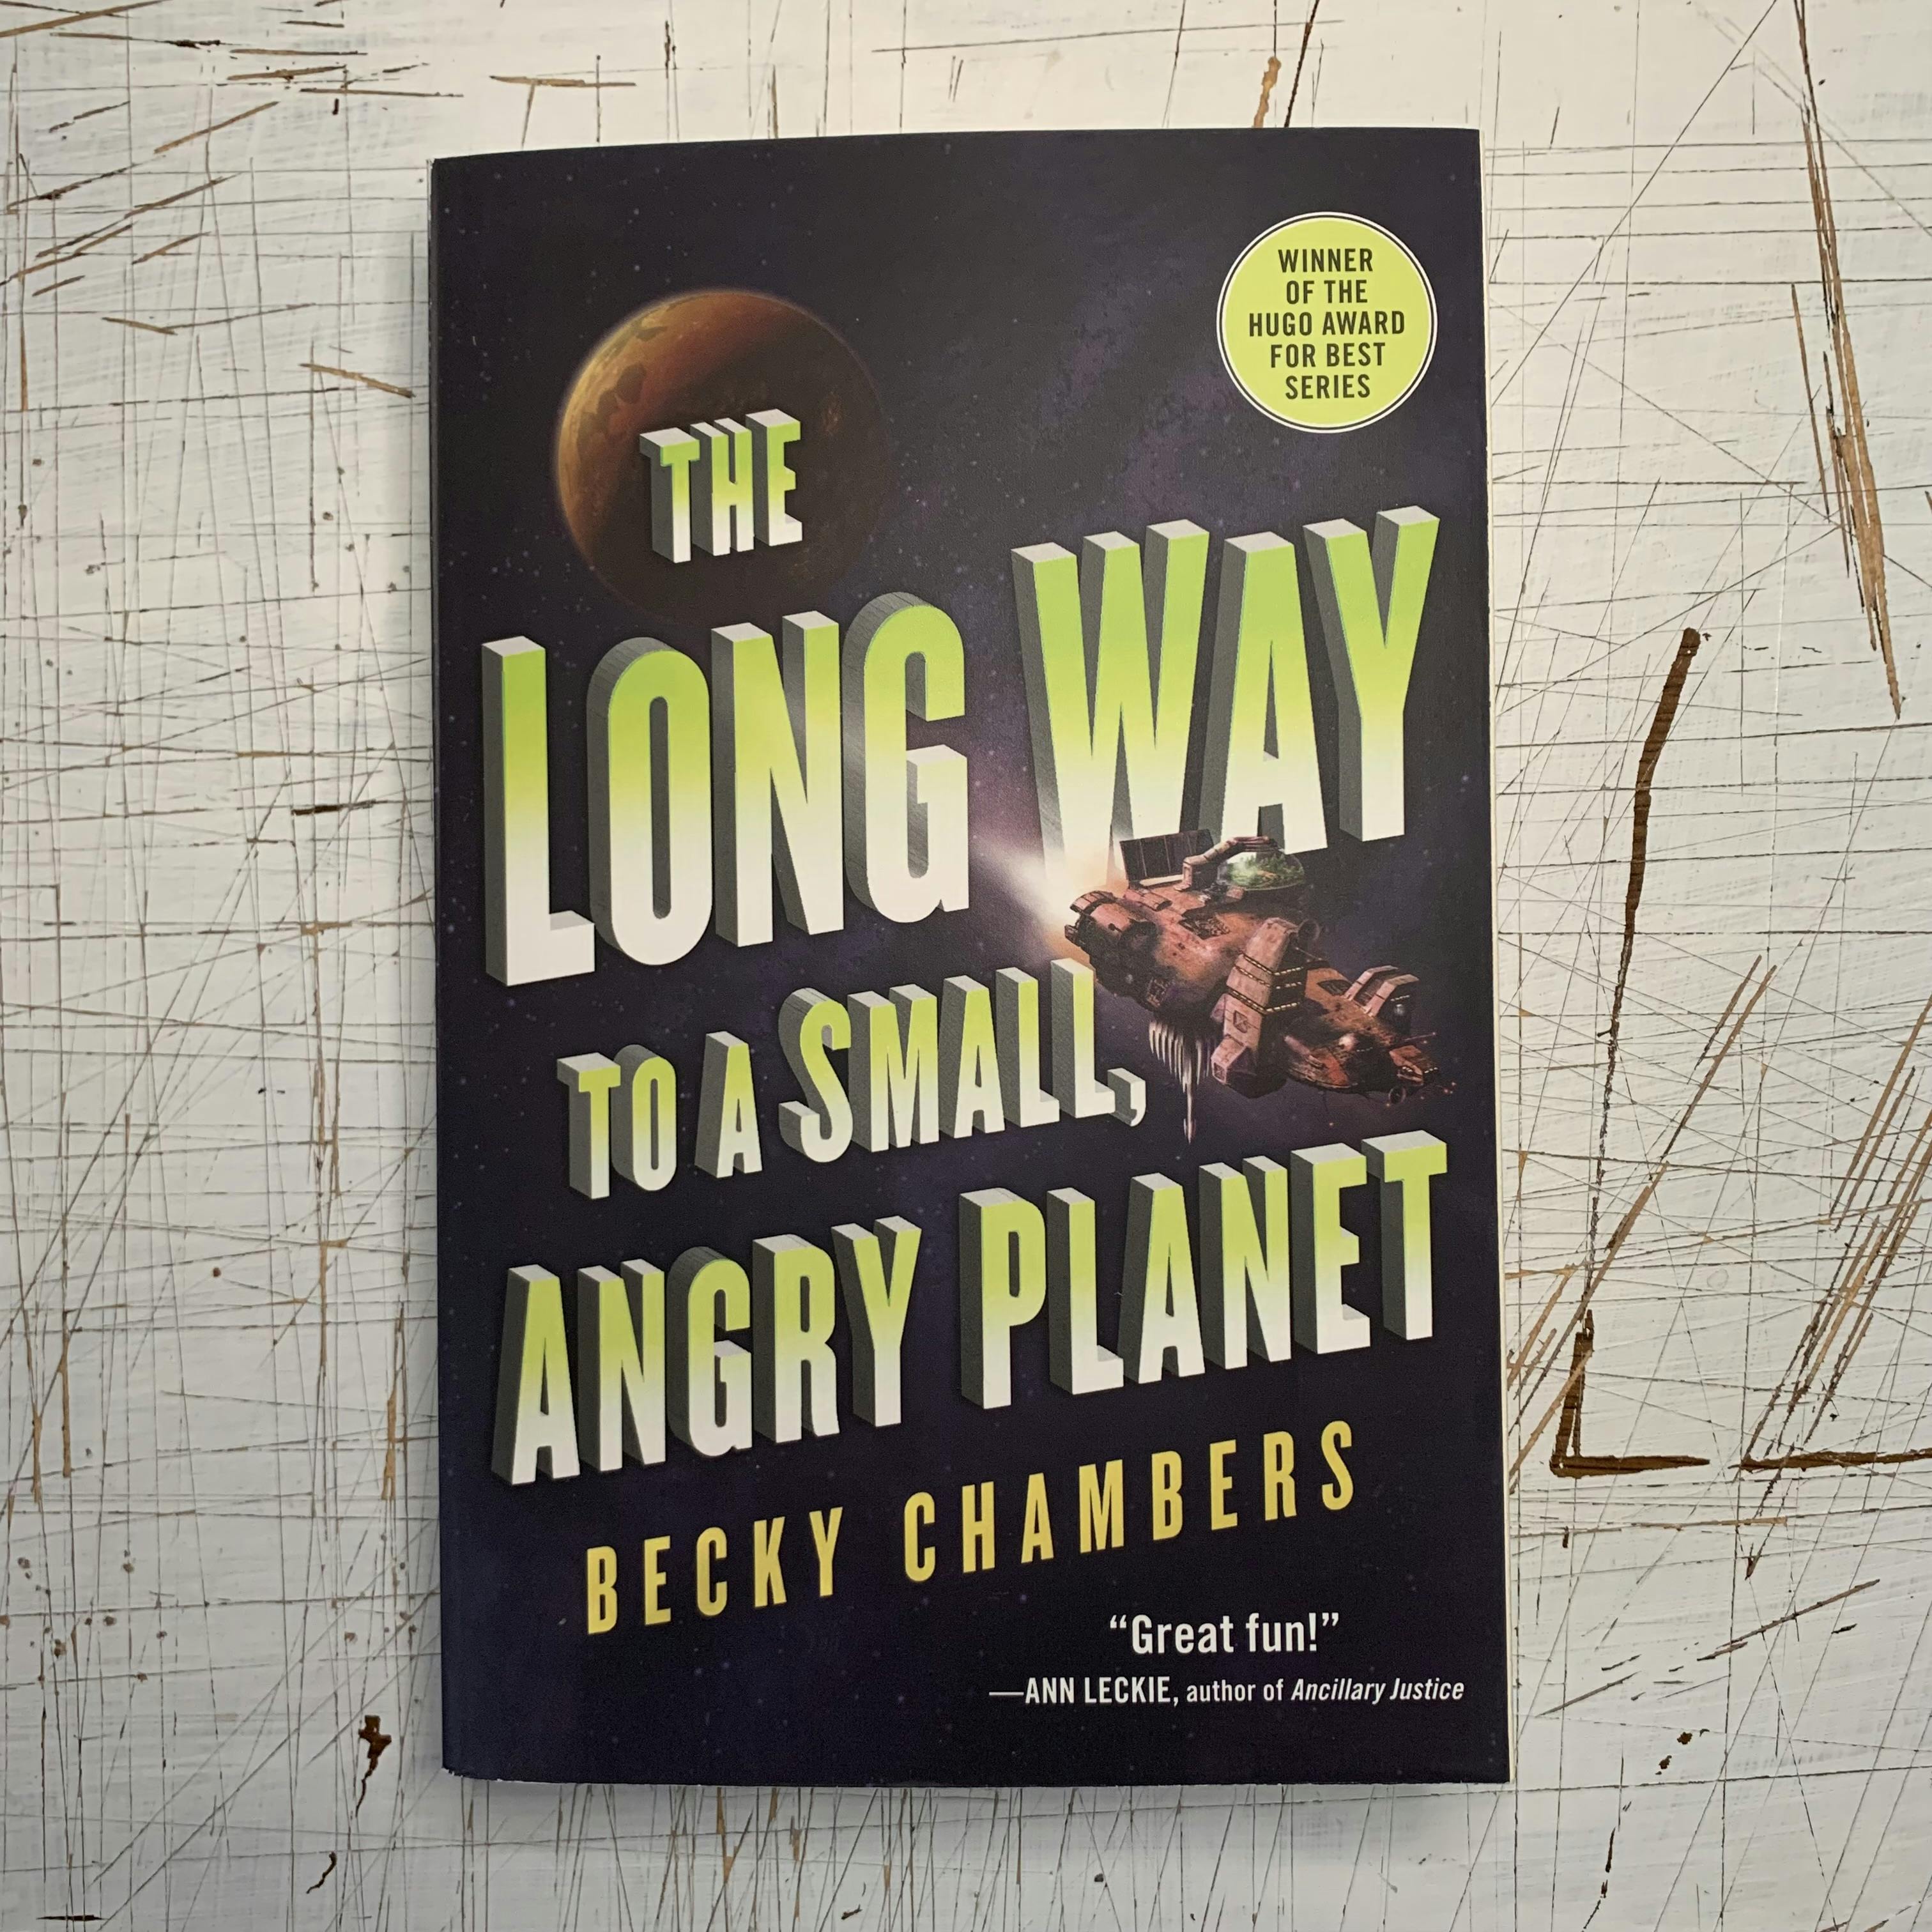 Cover of 'The long way to a small, angry planet', by Becky Chambers